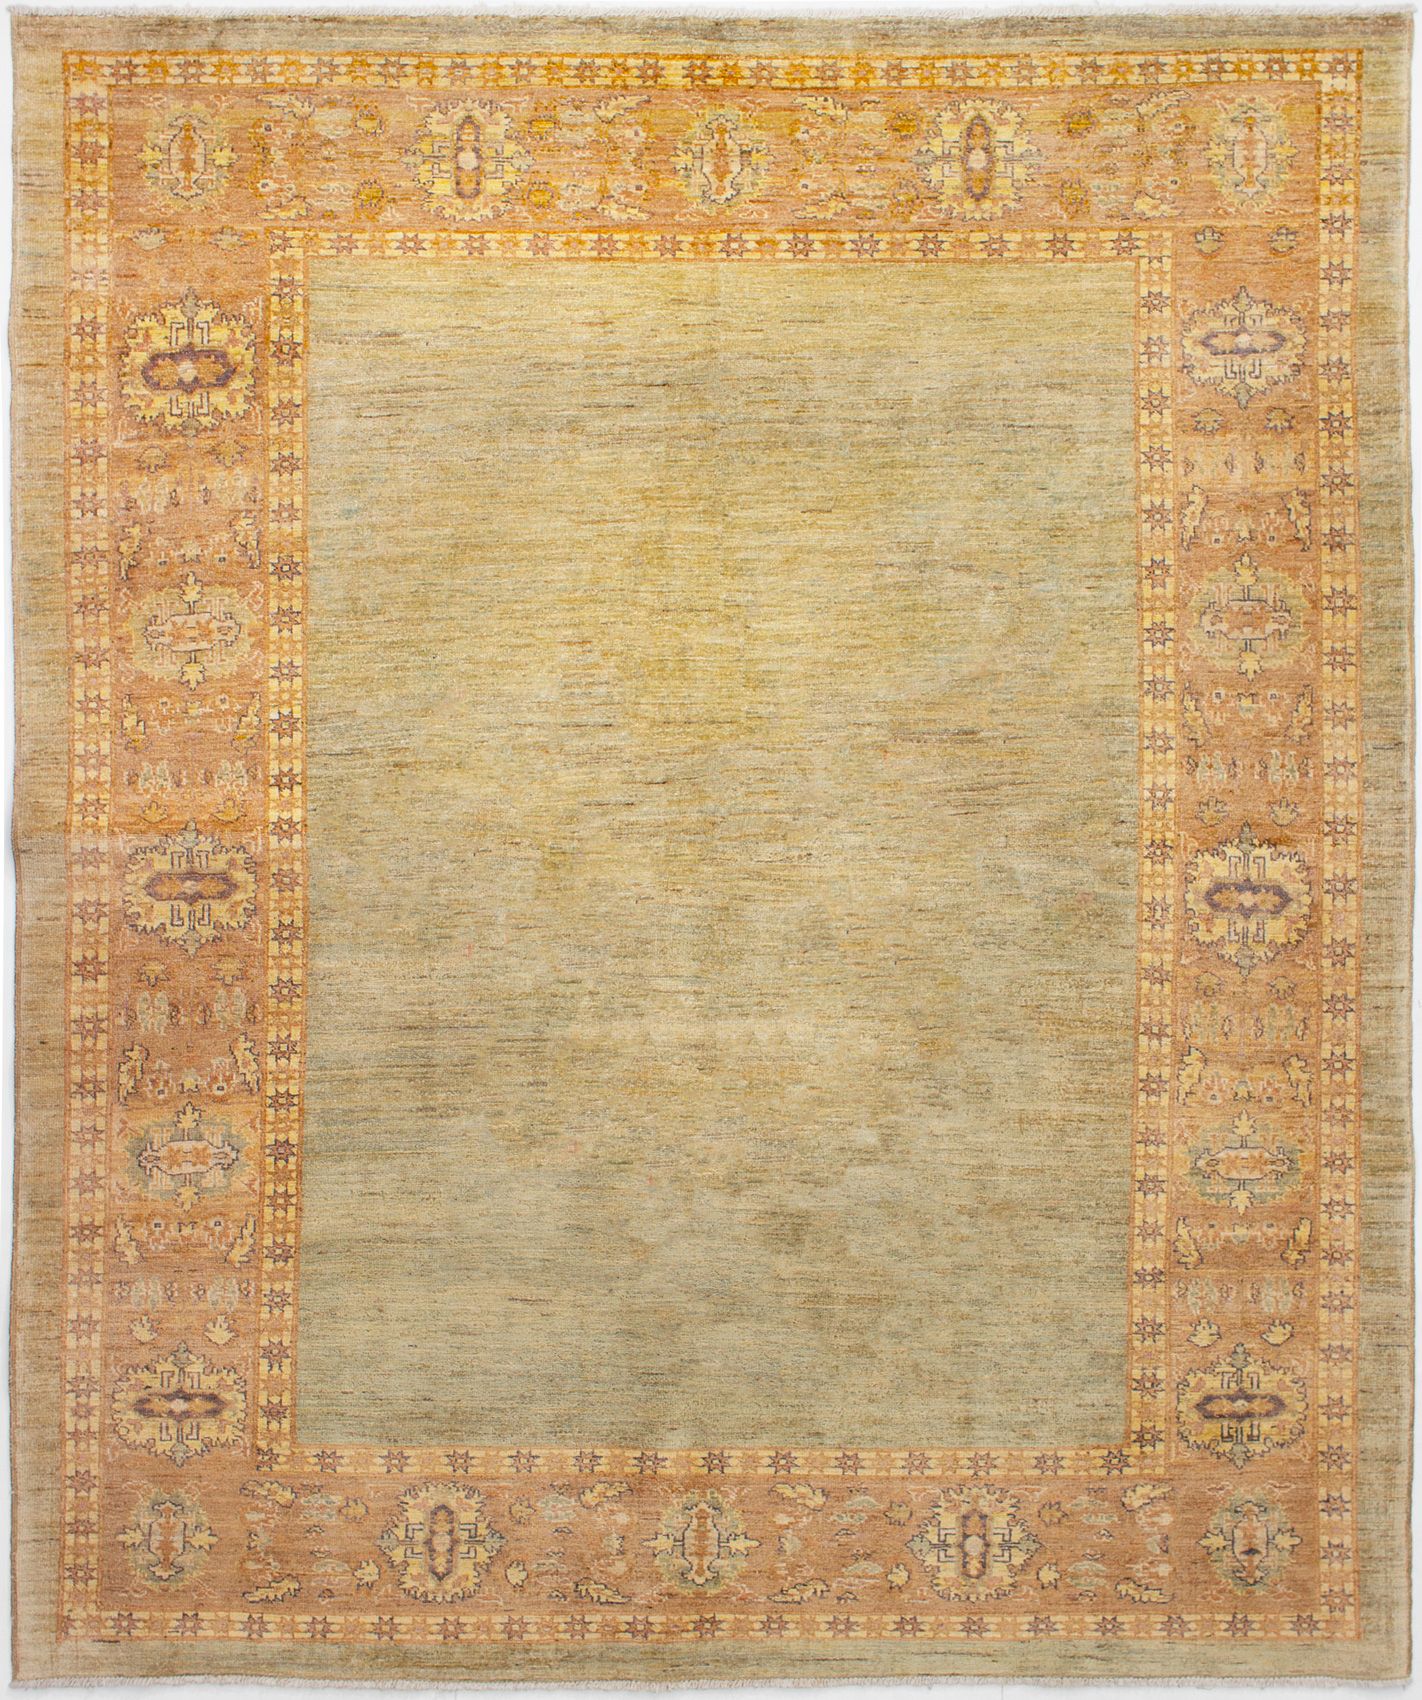 Hand-knotted Finest Ziegler Chobi Light Olive Green Wool Rug 6'7" x 7'10" Size: 6'7" x 7'10"  